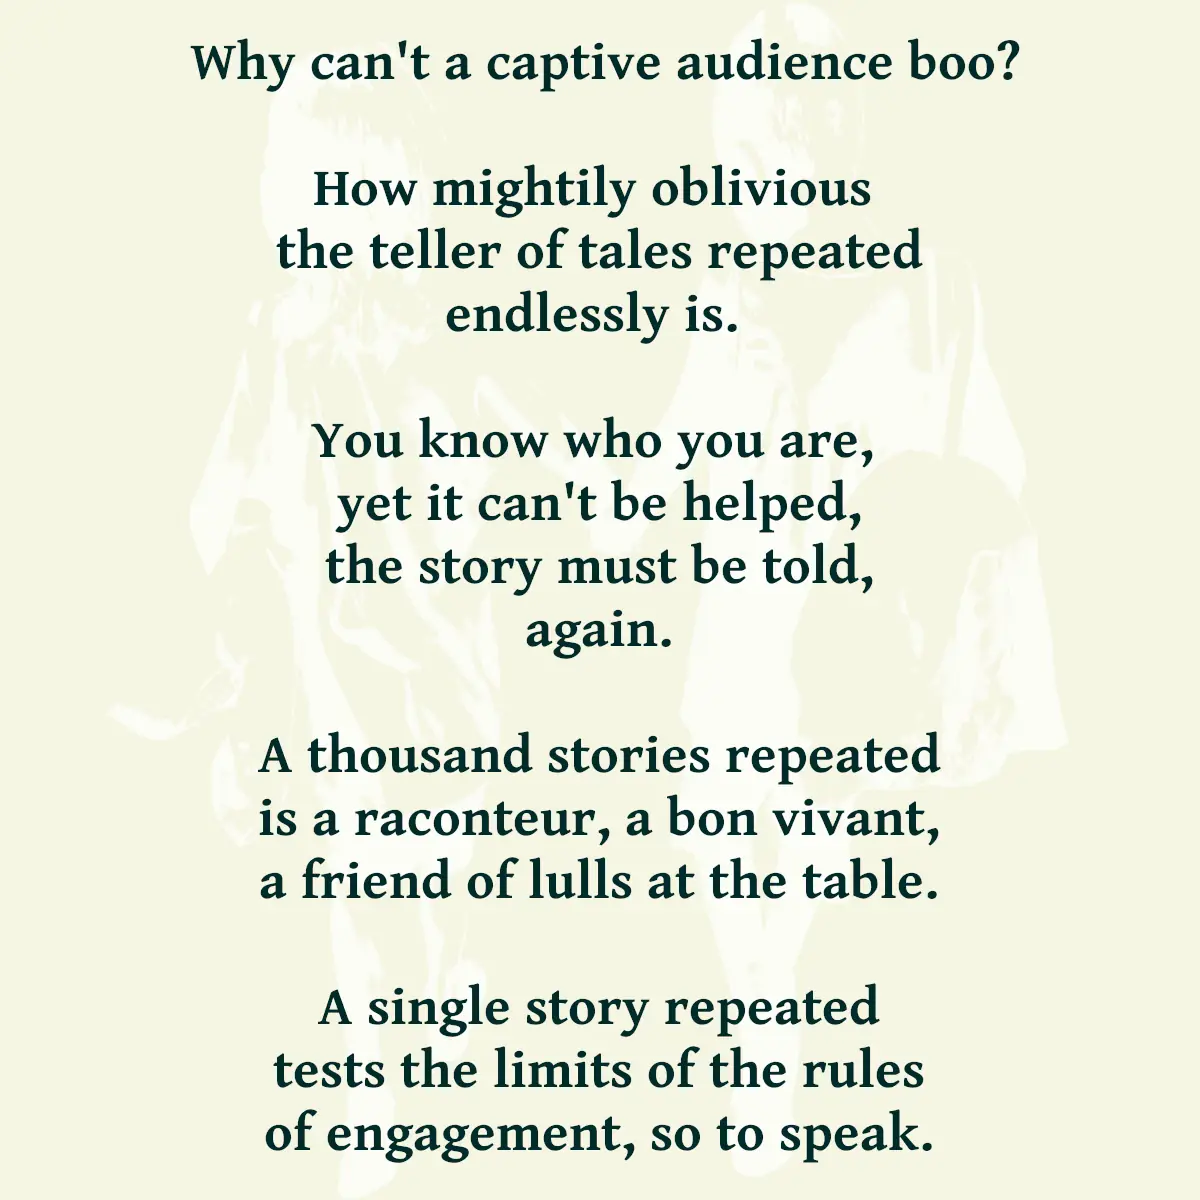 Why can't a captive audience boo? How mightily oblivious the teller of tales repeated endlessly is. You know who you are, yet it can't be helped, the story must be told, again. A thousand stories repeated is a raconteur, a bon vivant, a friend of lulls at the table. A single story repeated tests the limits of the rules of engagement, so to speak.